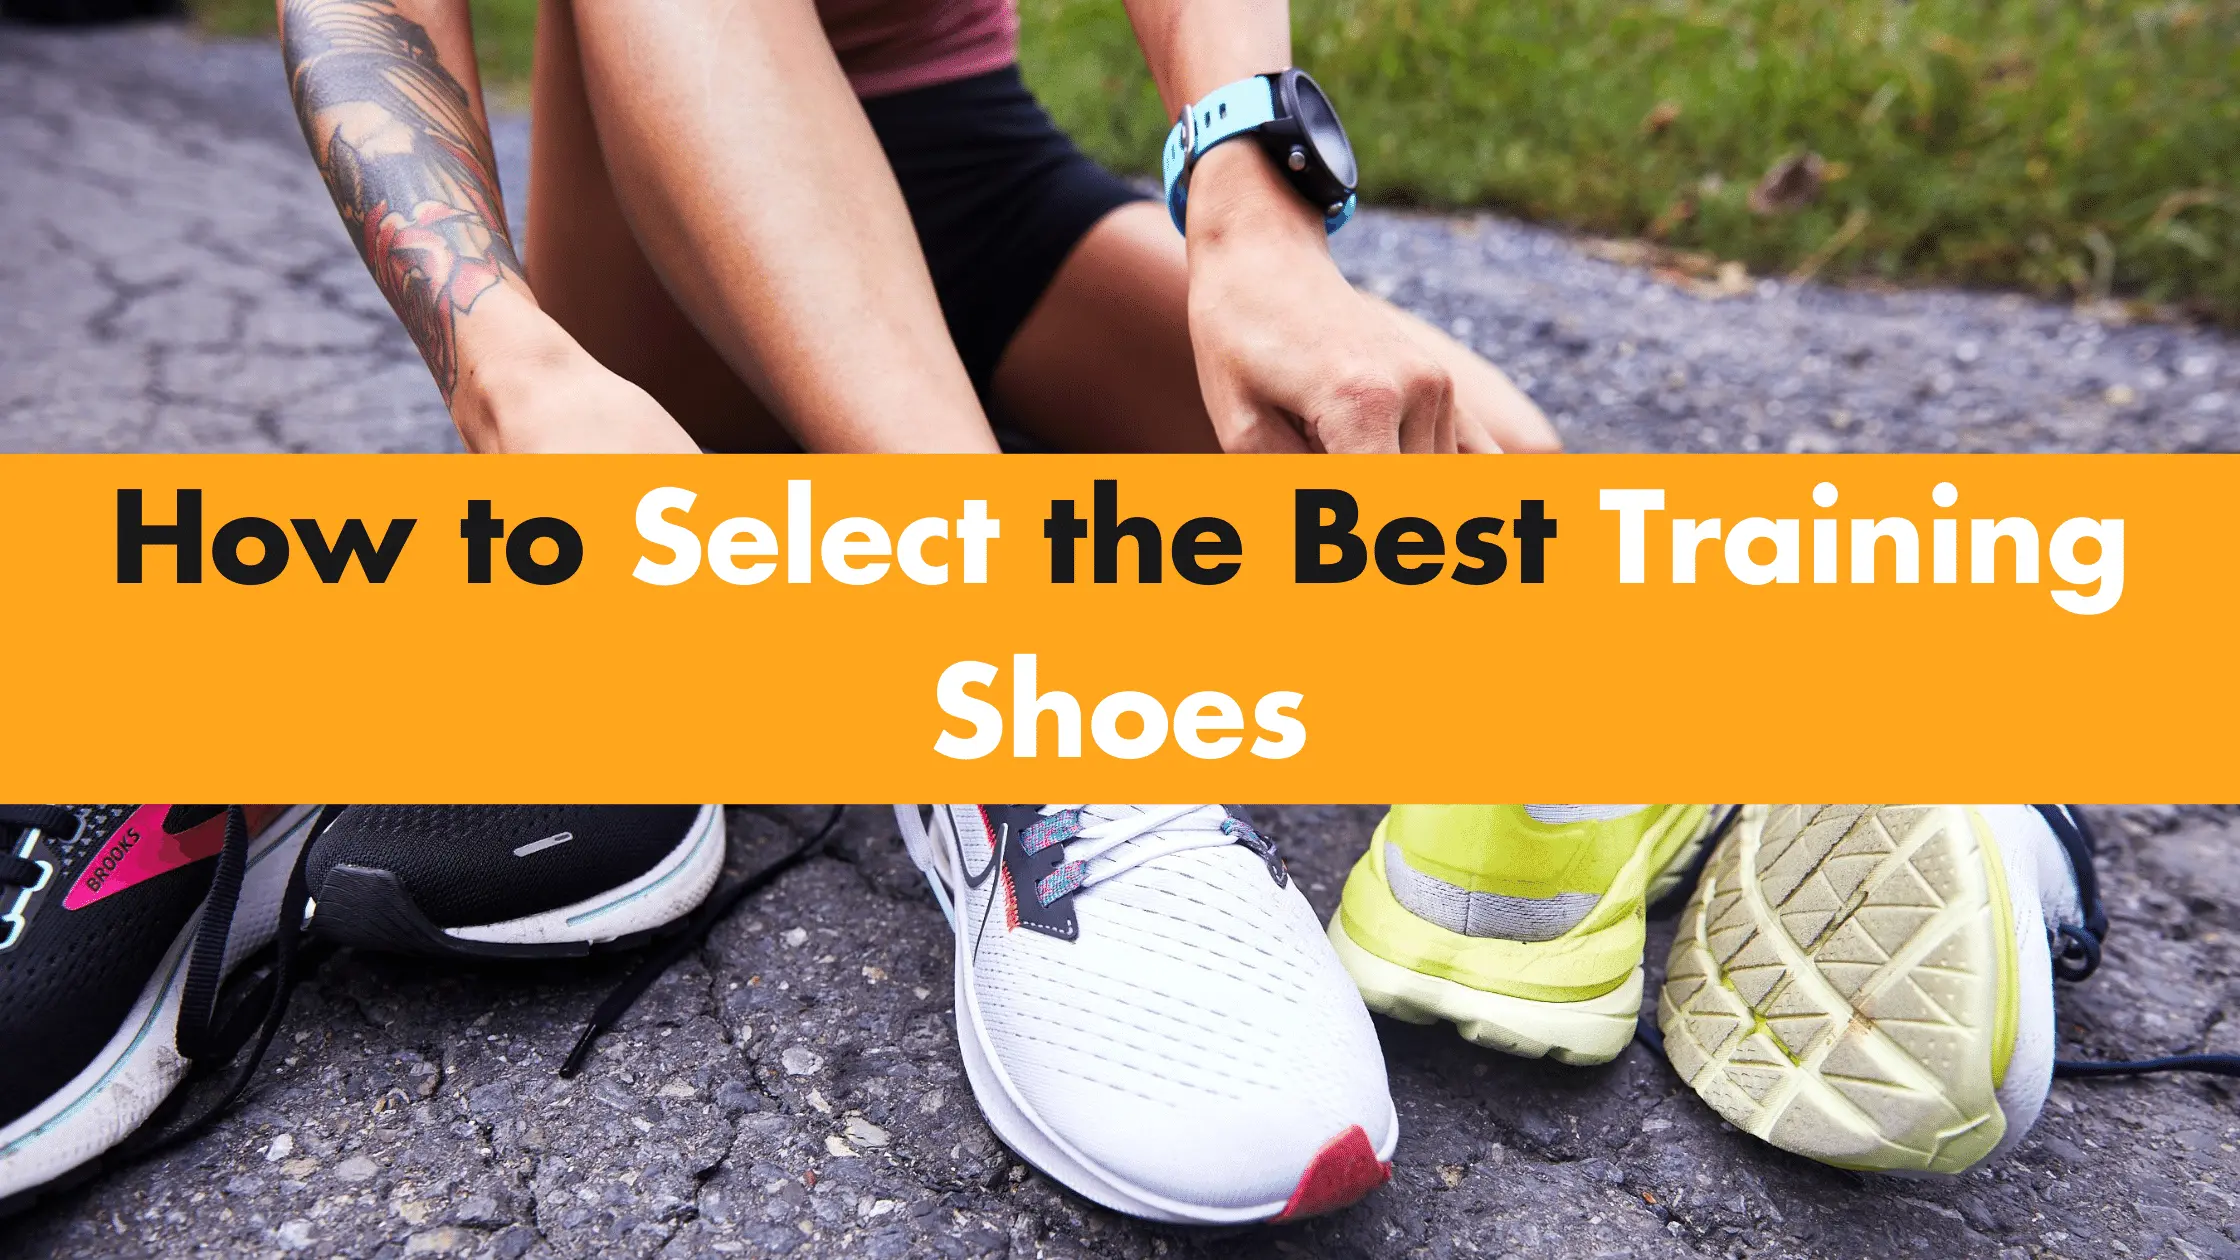 How to Select the Best Training Shoes